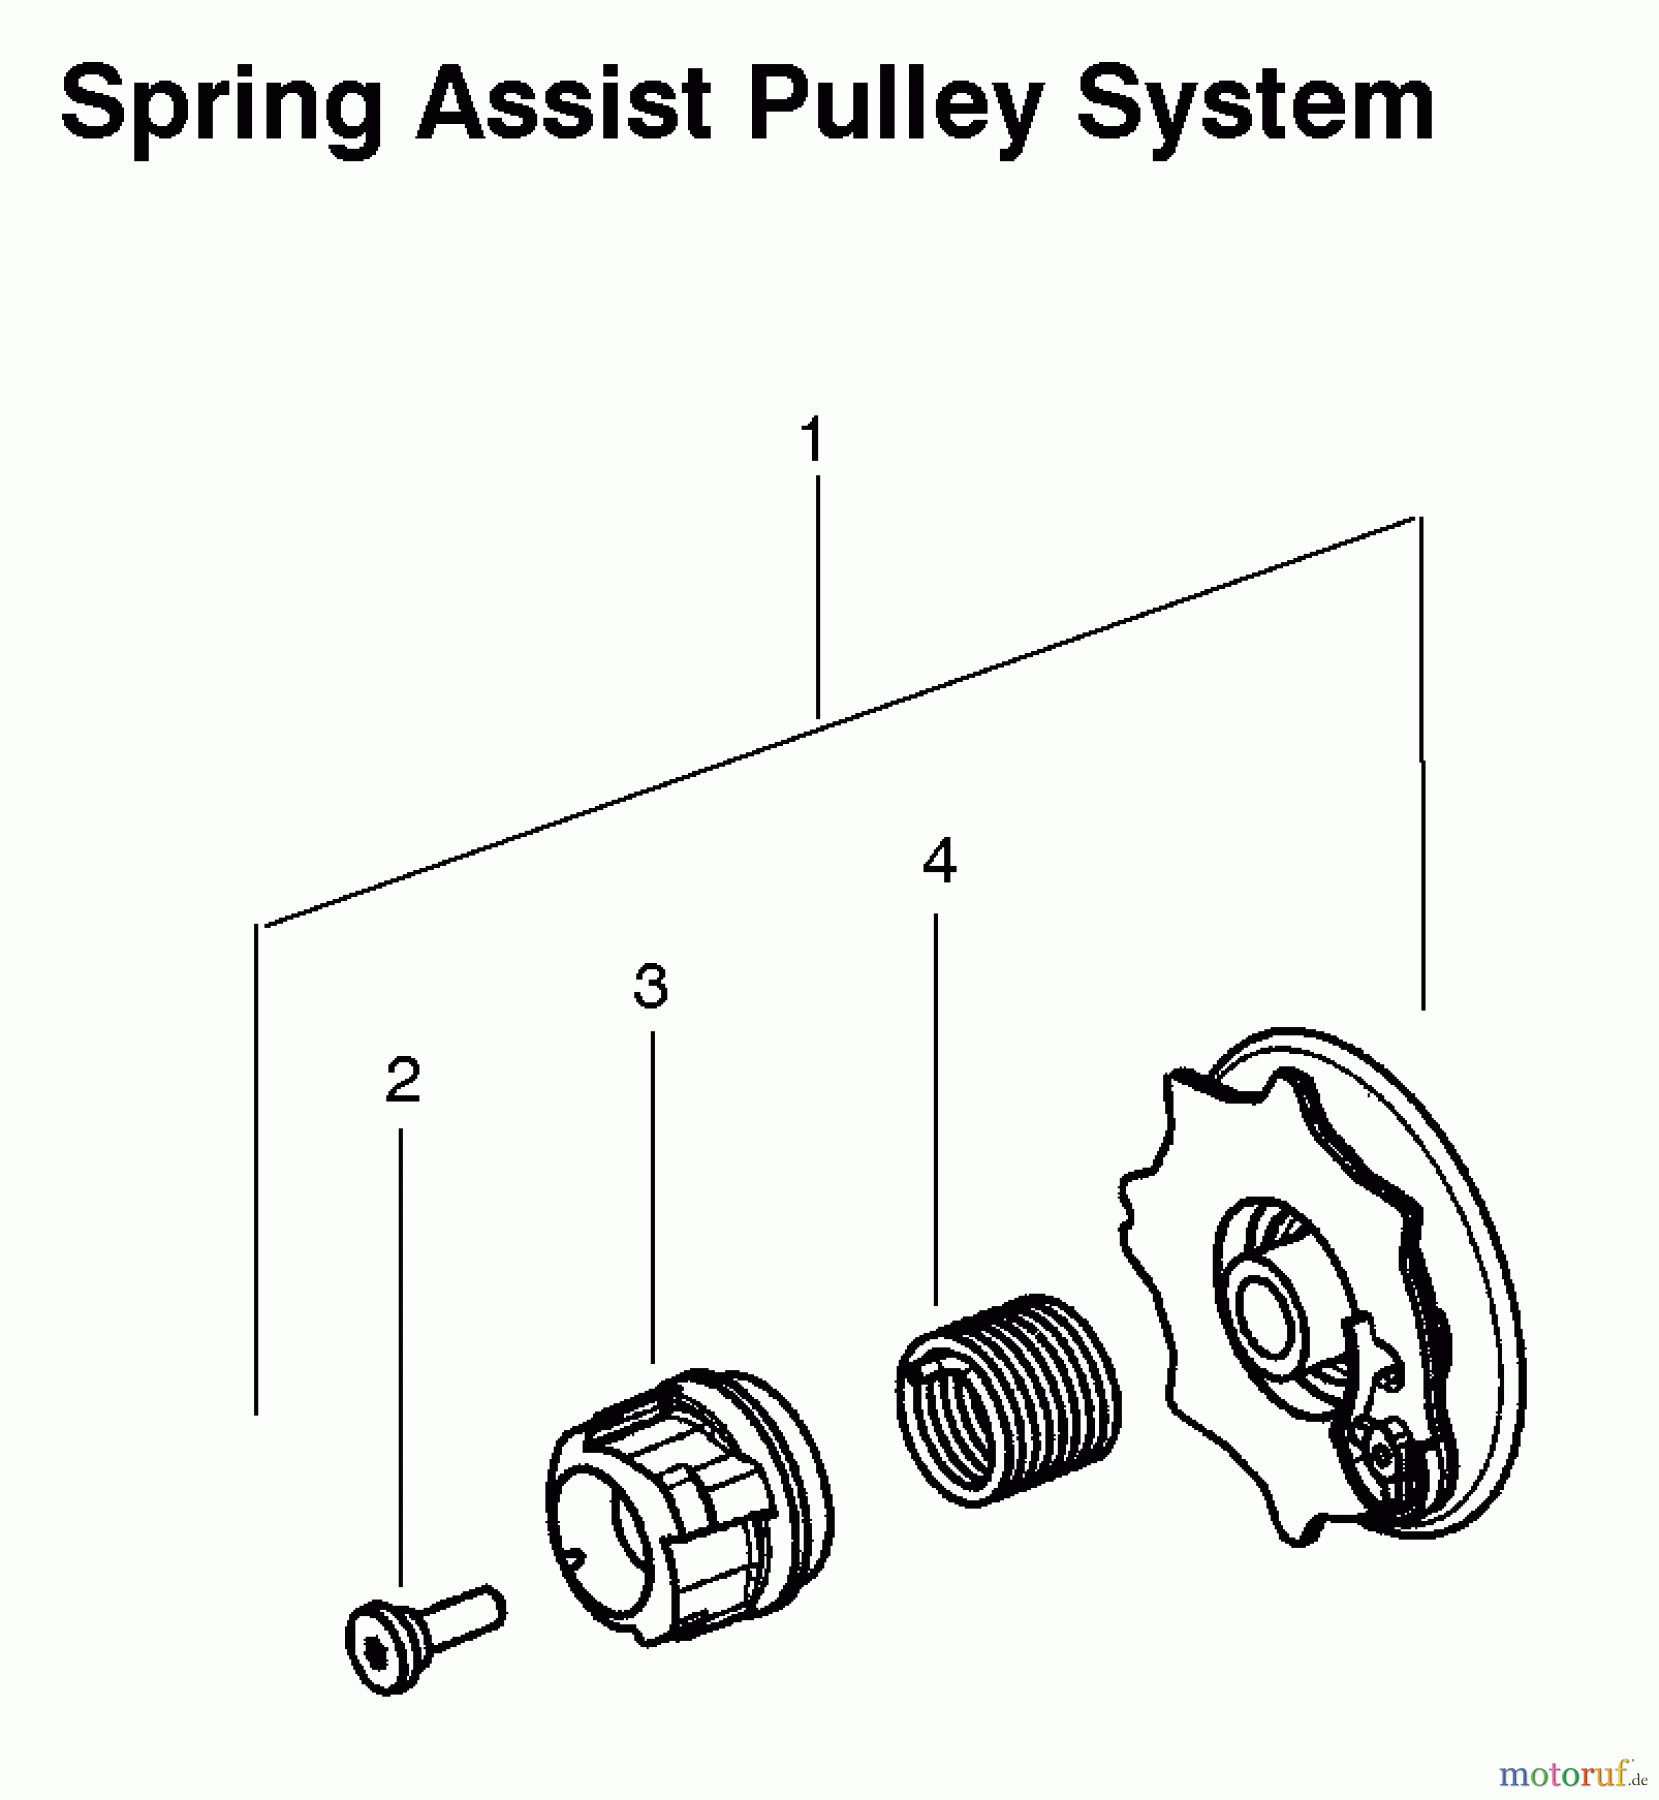  Poulan / Weed Eater Motorsägen P3314 (Type 1) - Poulan Chainsaw Spring Assist Pulley System